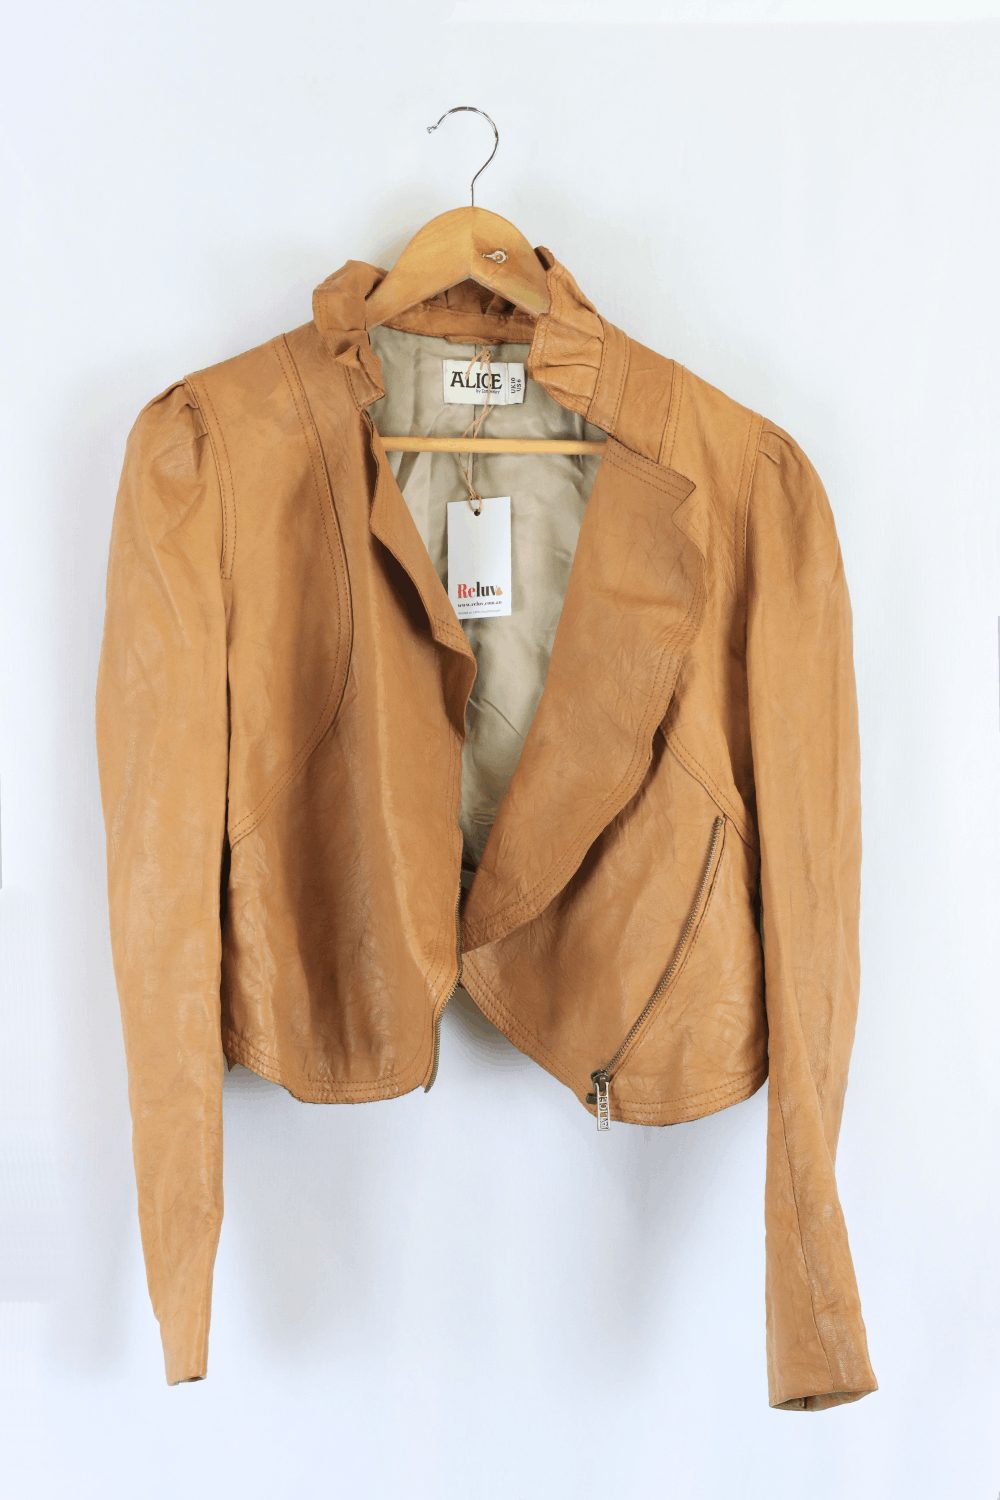 Alice by temperley Brown Leather Jacket 10